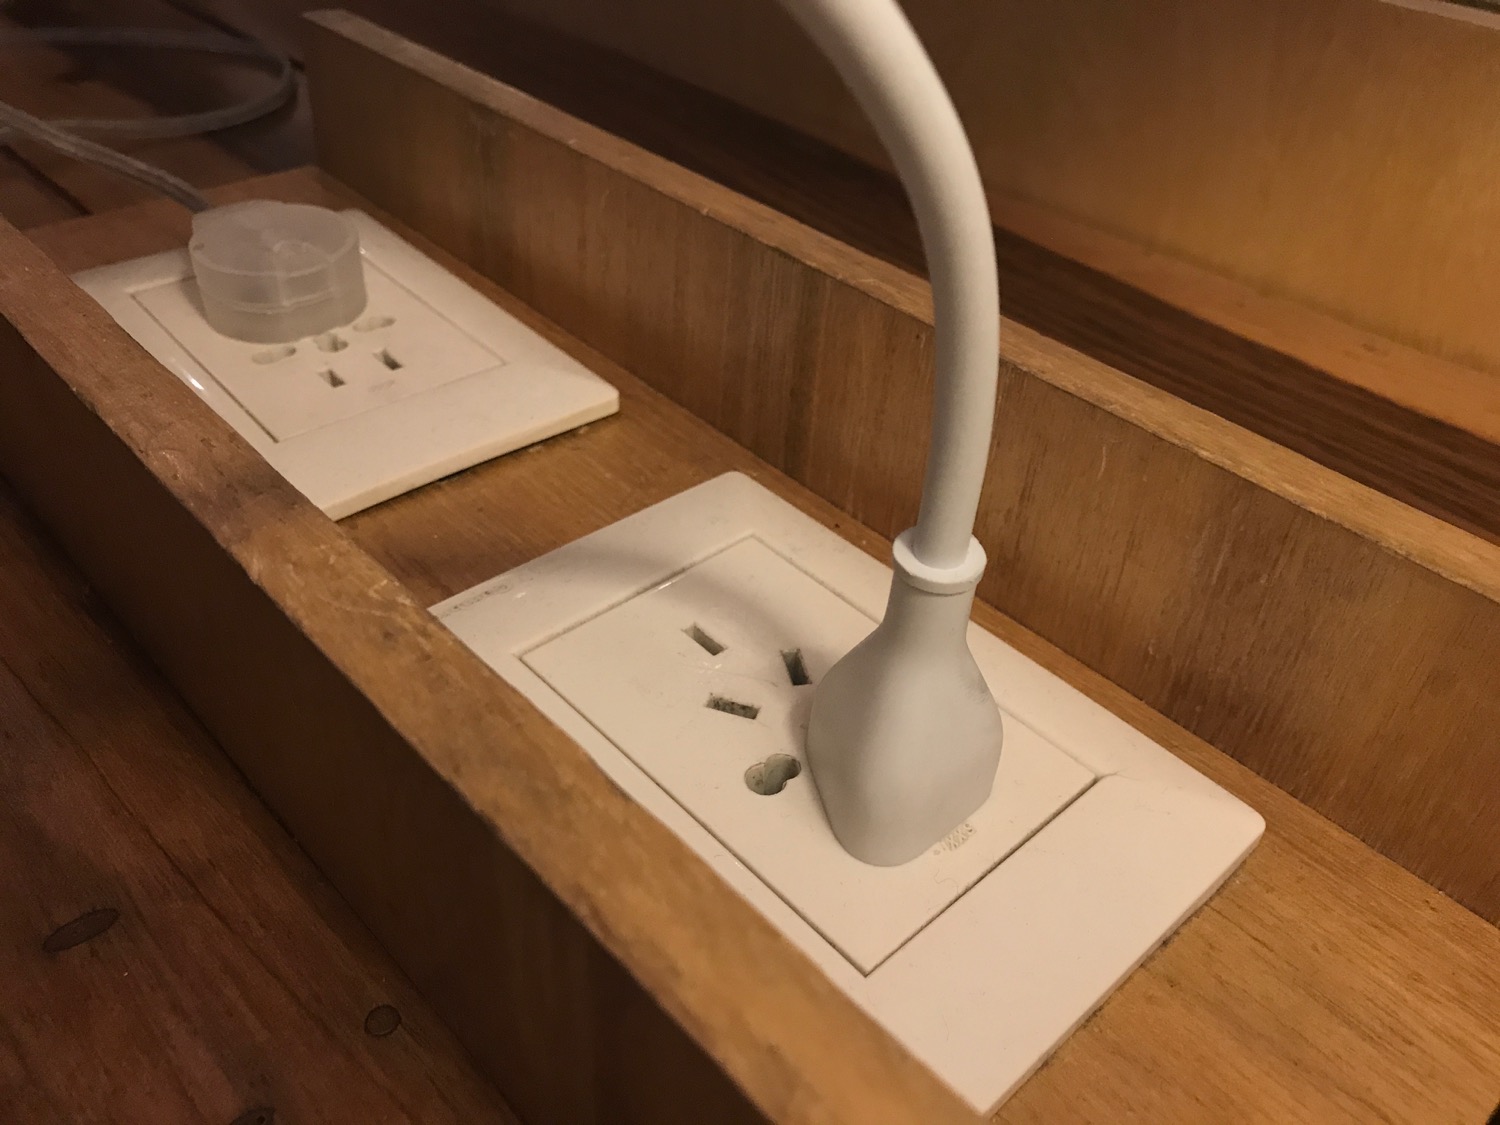 a white electrical outlet with a white cord plugged into it